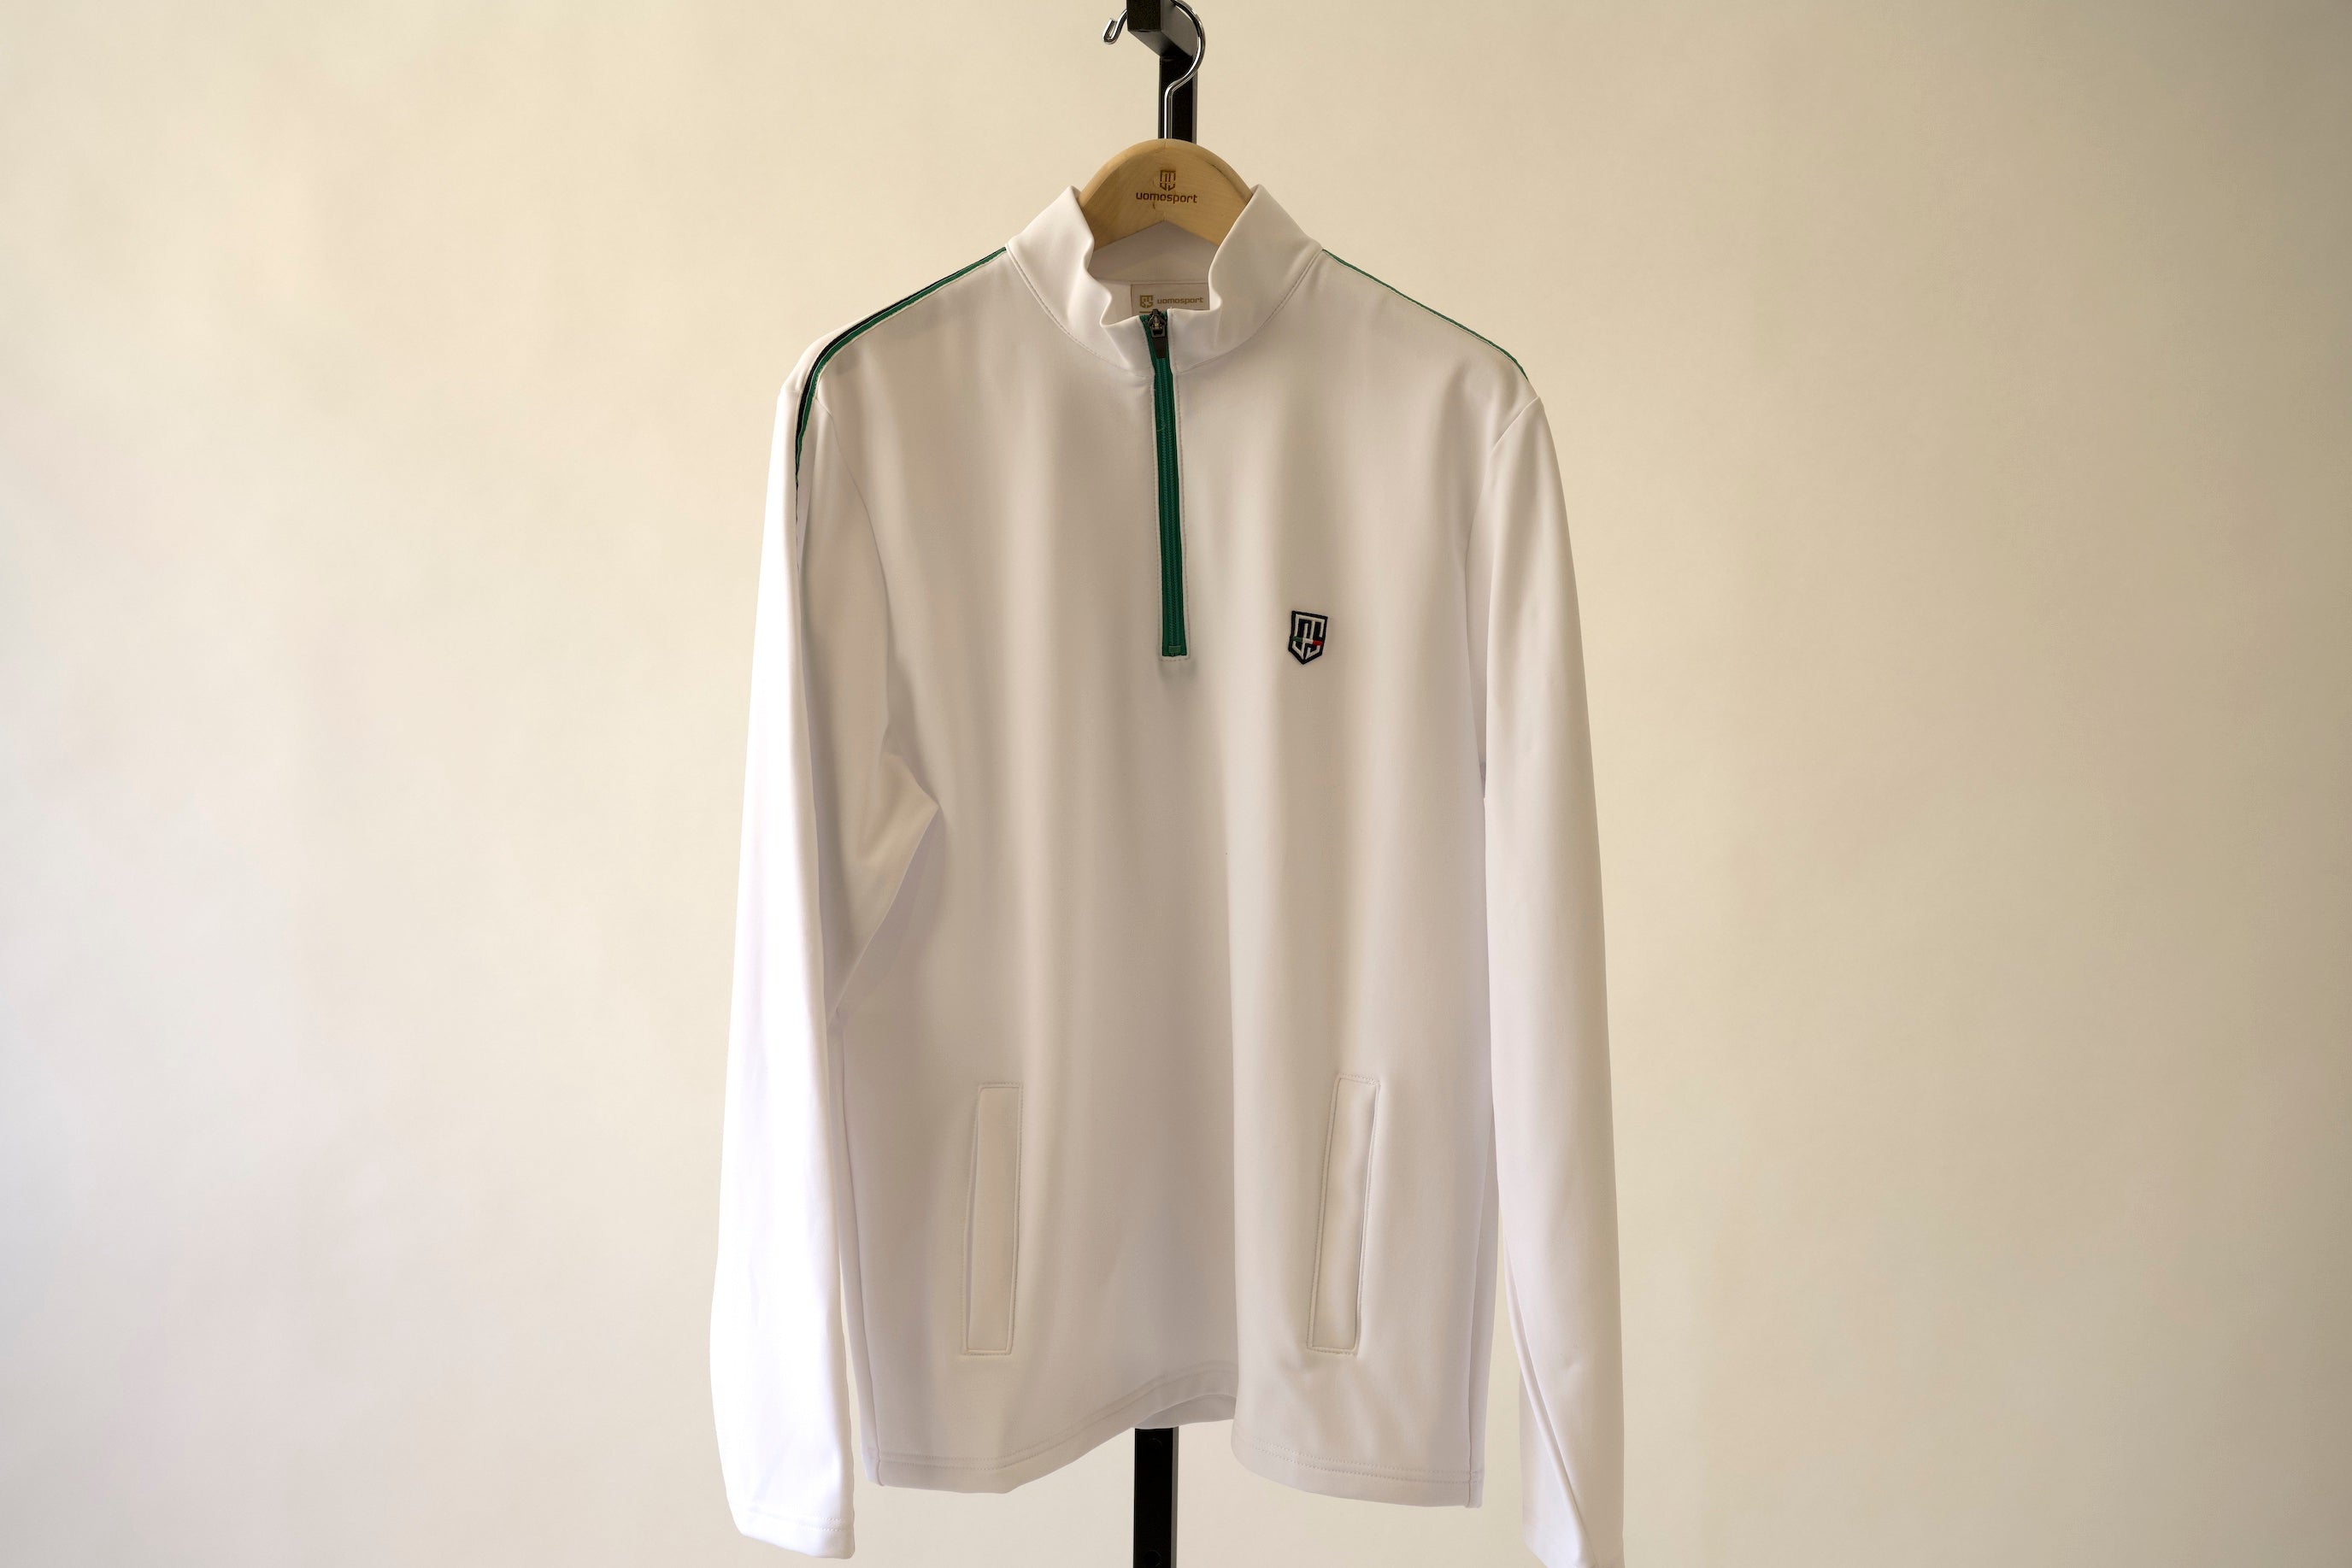 Navigare III Pullover - Bianco w/ Cream, Navy, and Green Trim